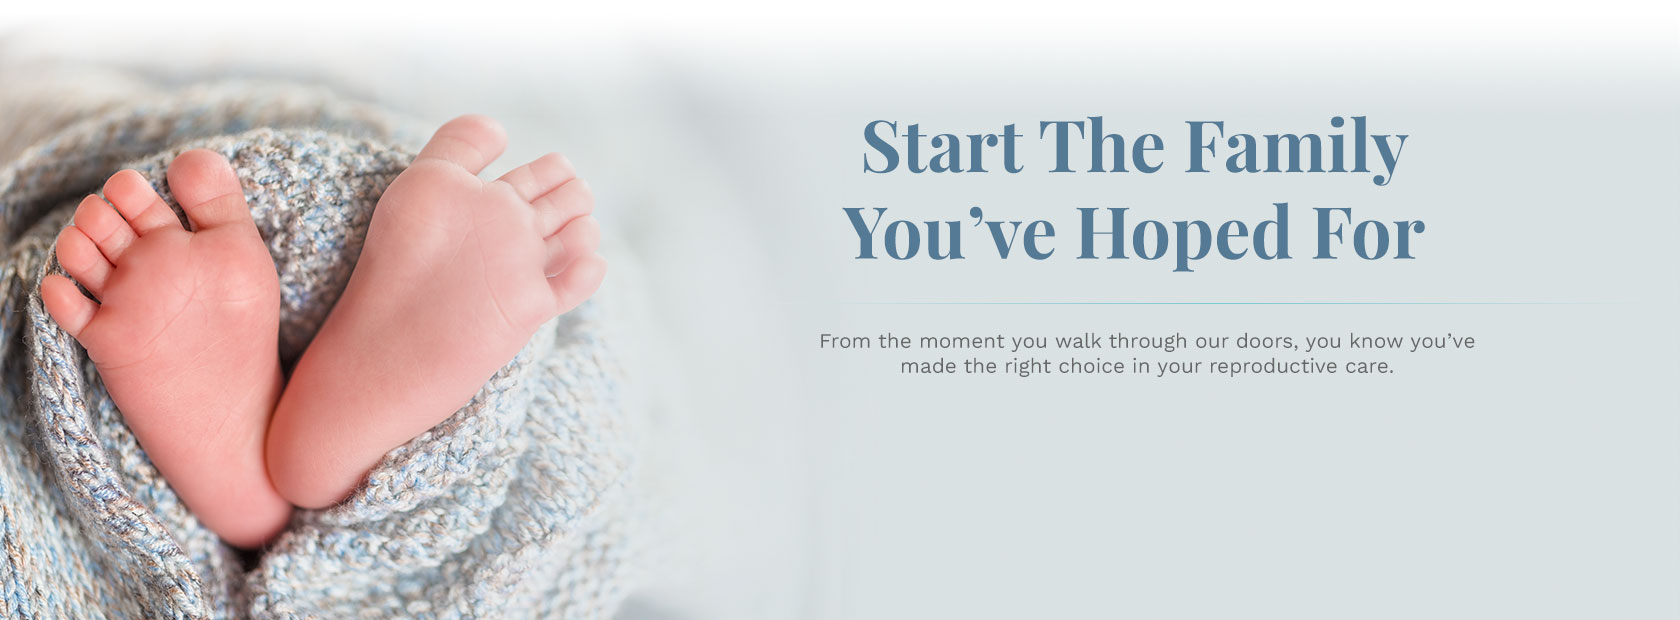 Start The Family You’ve Hoped For - From the moment you walk through our doors, you know you’ve made the right choice in your reproductive care.